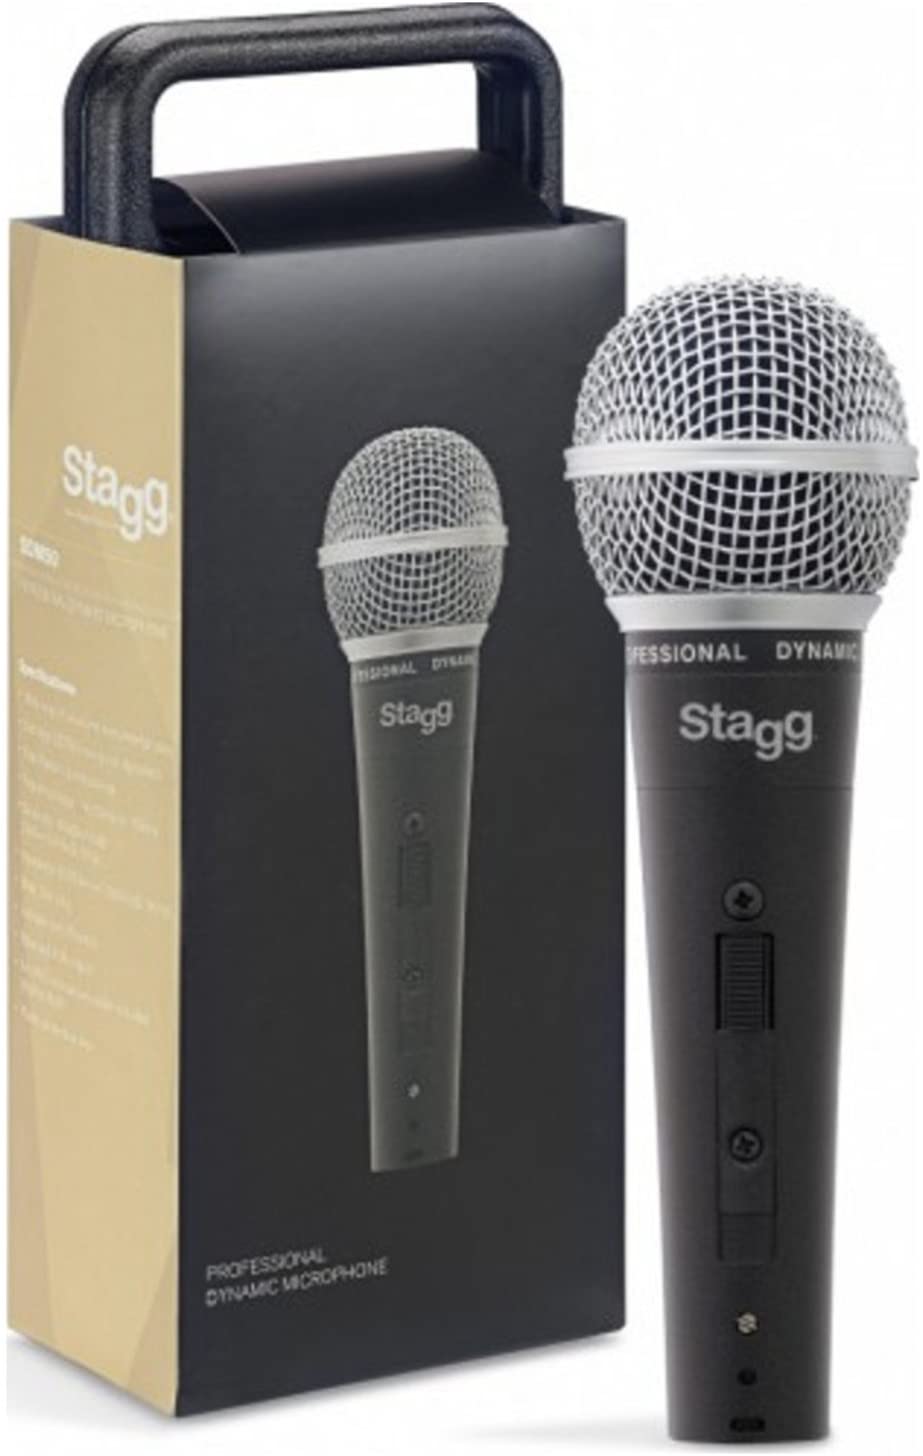 Stagg SDM50 Professional Dynamic Microphone